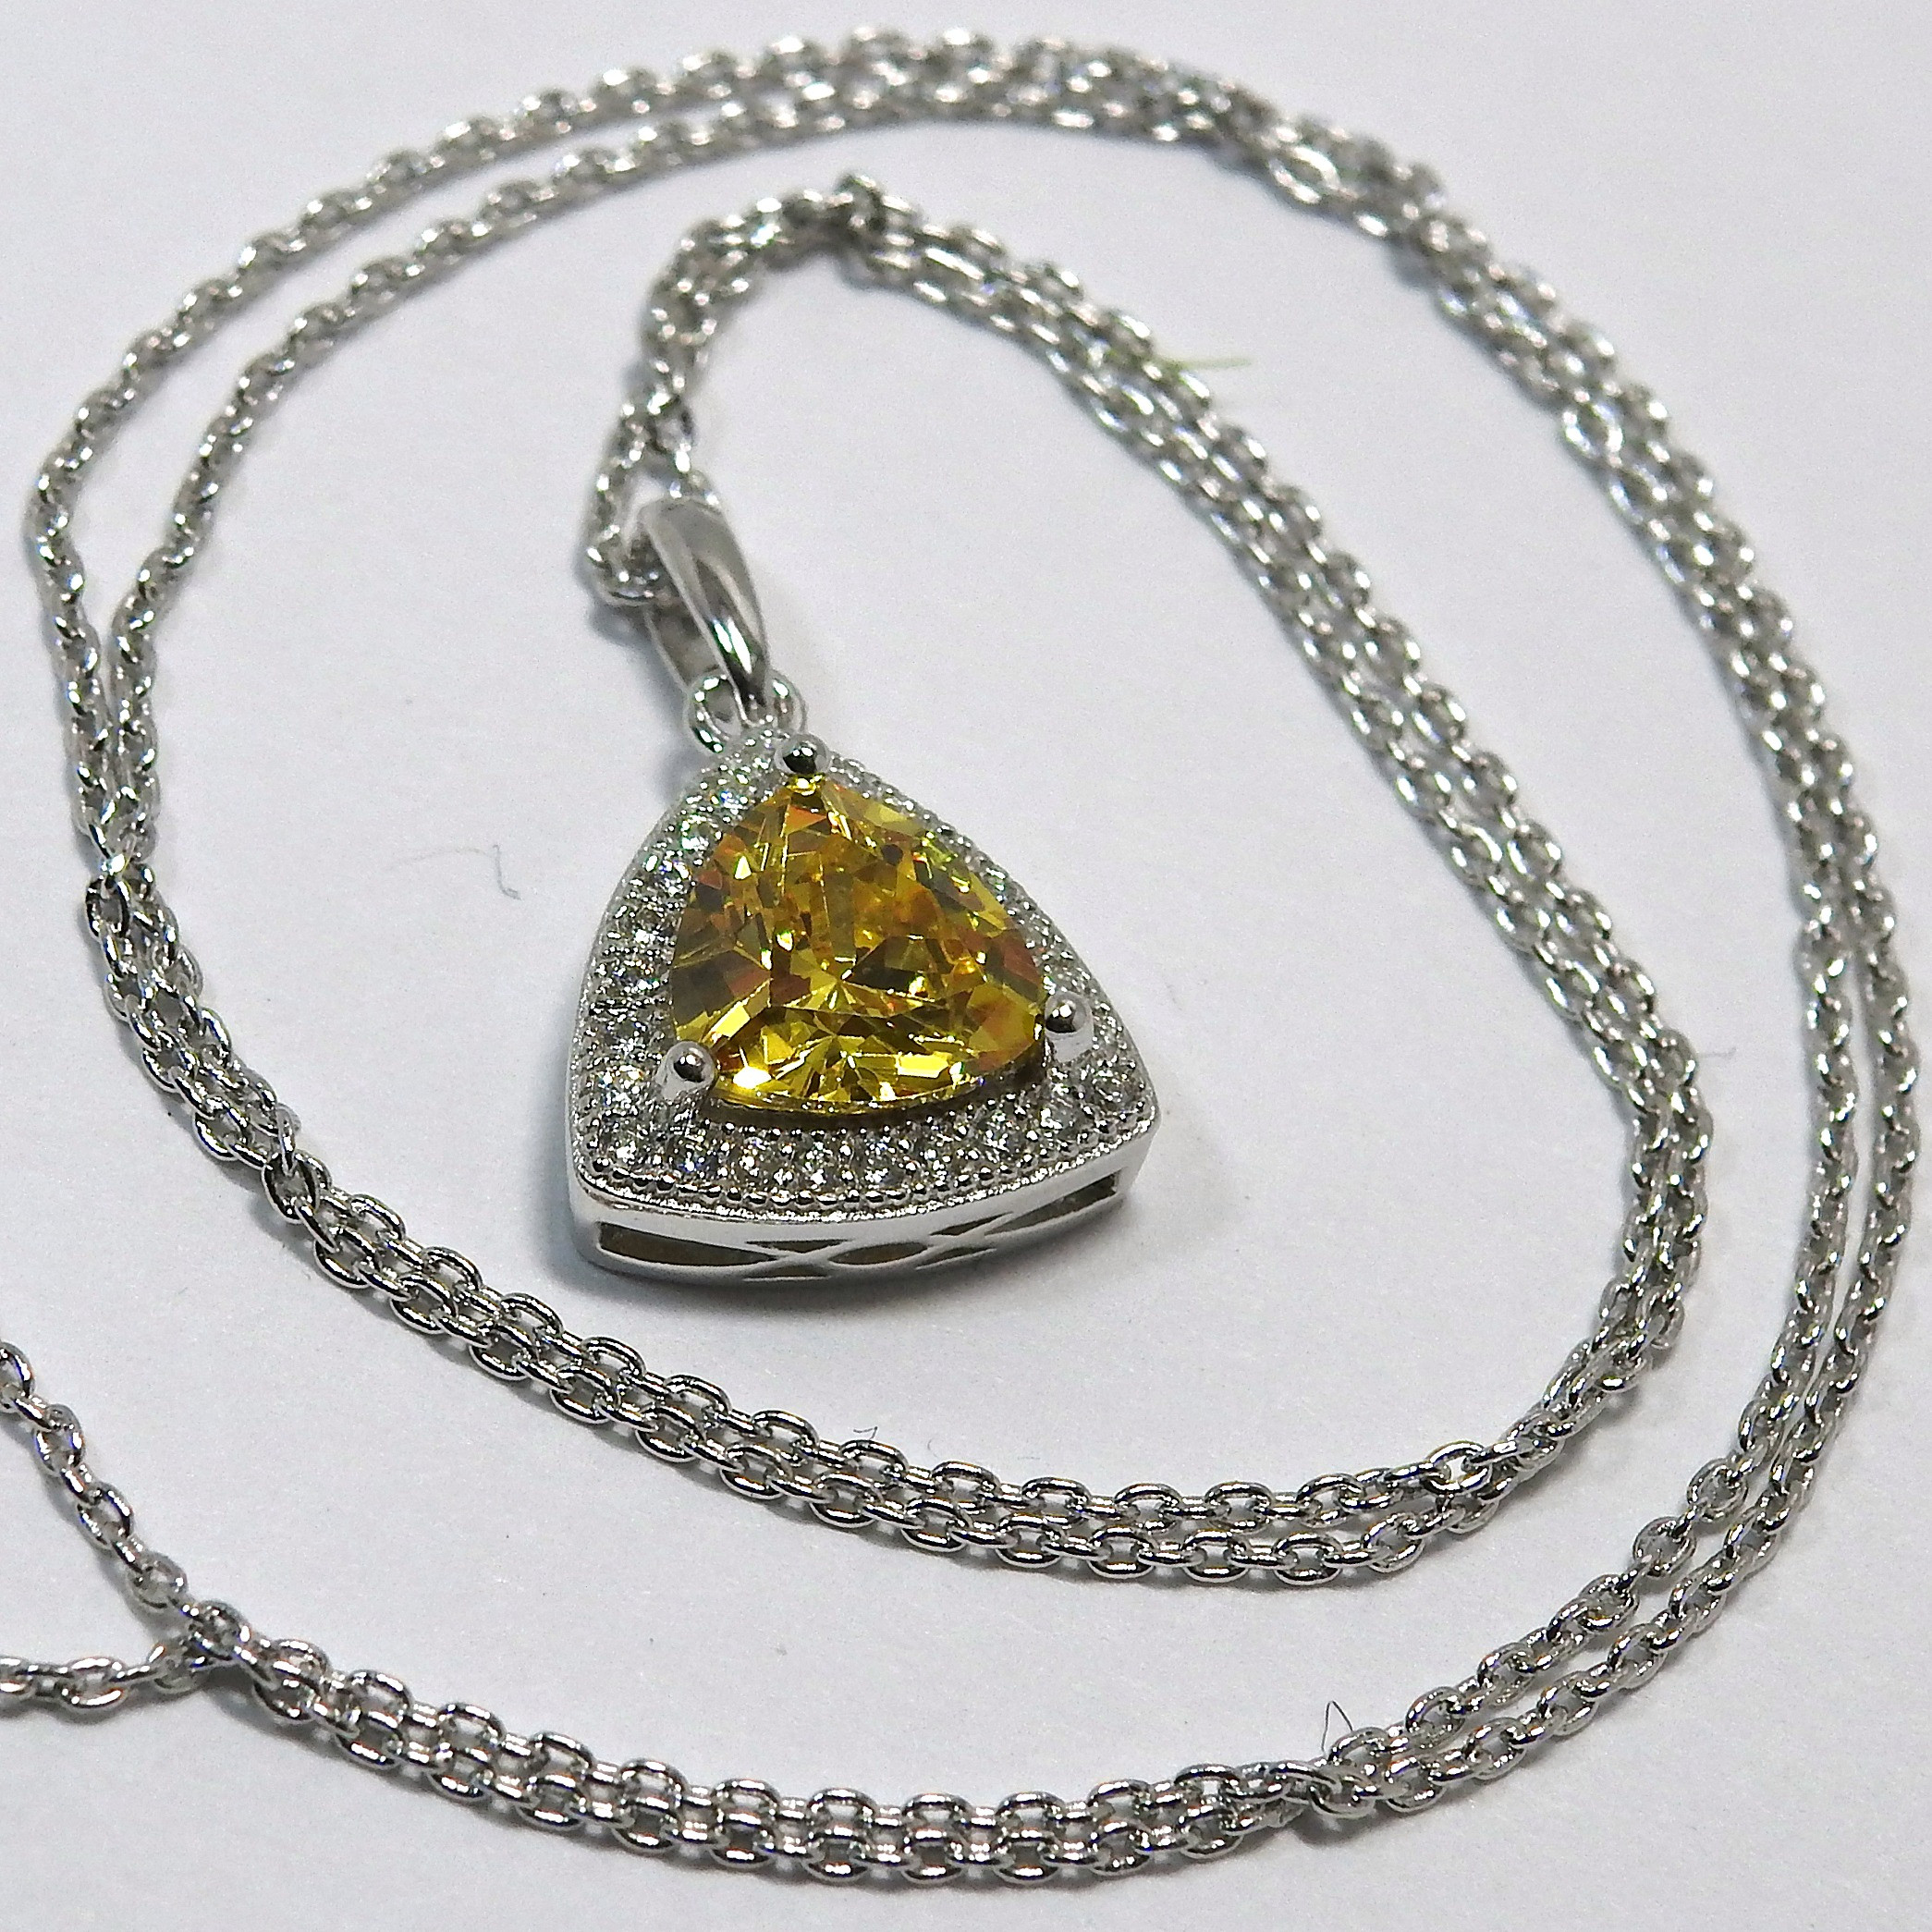 Yellow Topaz Necklace
 925 Solid Sterling Silver 1 80ctw Yellow Topaz & White